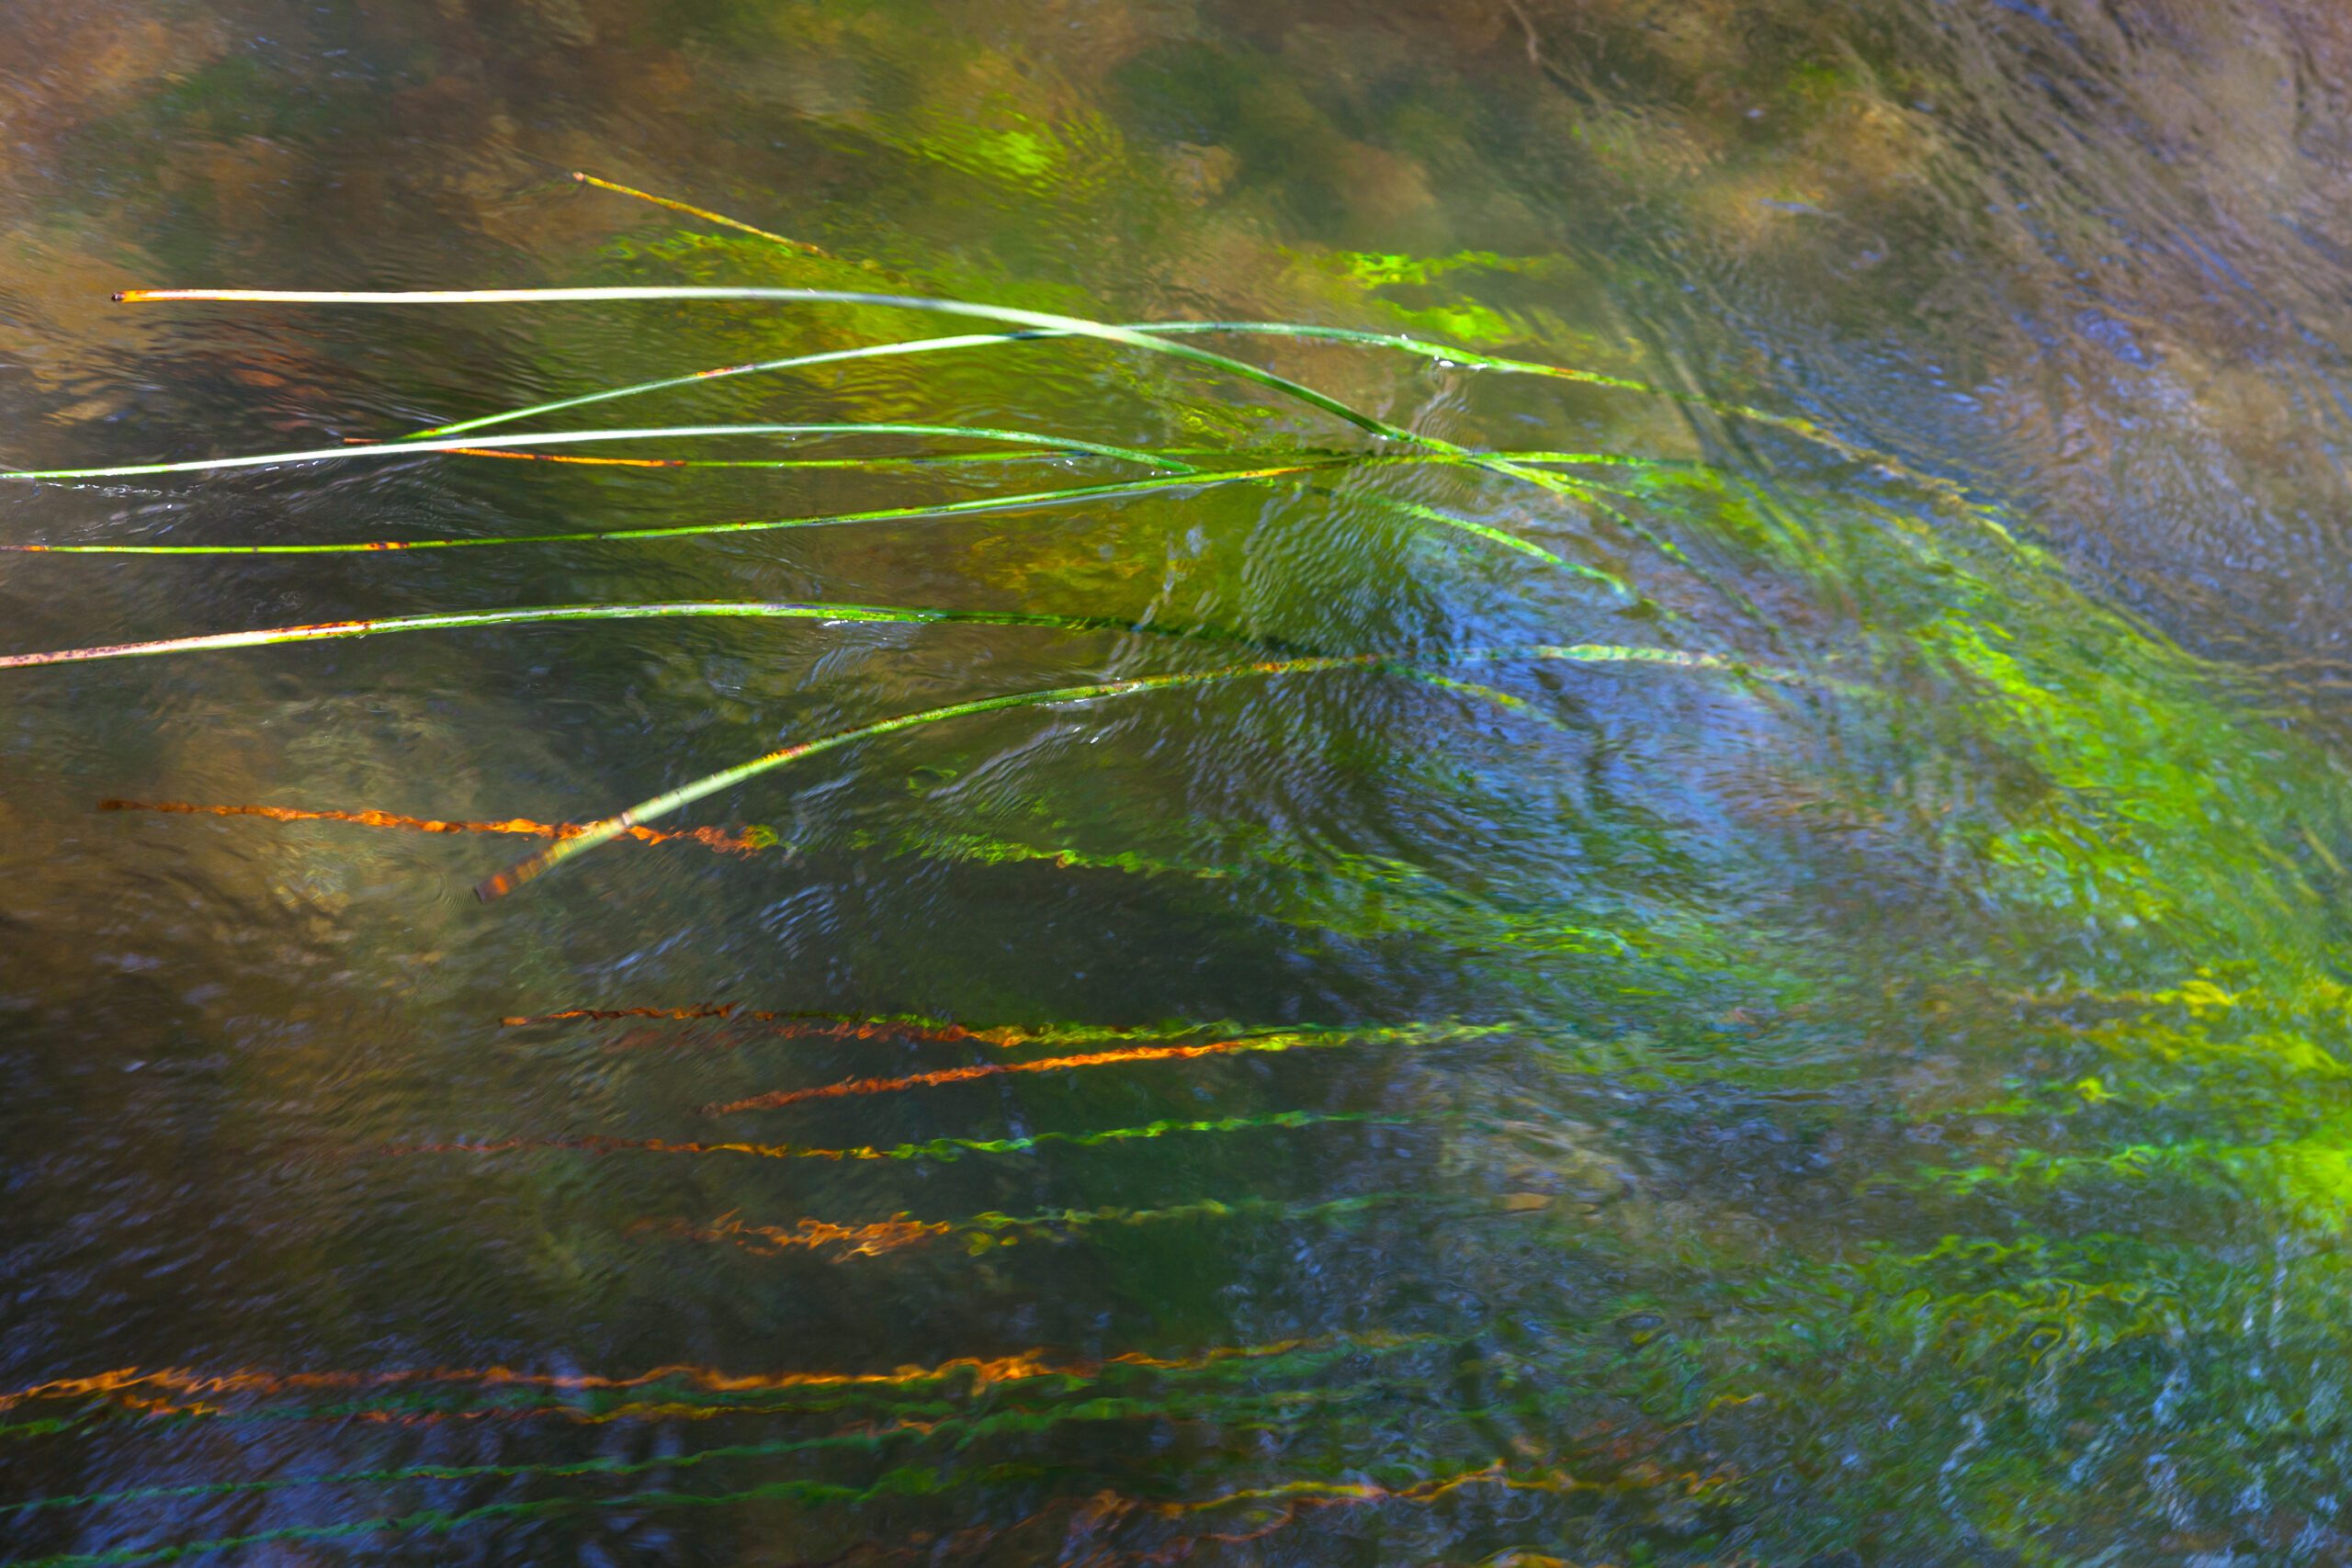 Croatian Nature Art, Fluid Motion Photography, Plitvice Lakes Scene, River Currents Artistry